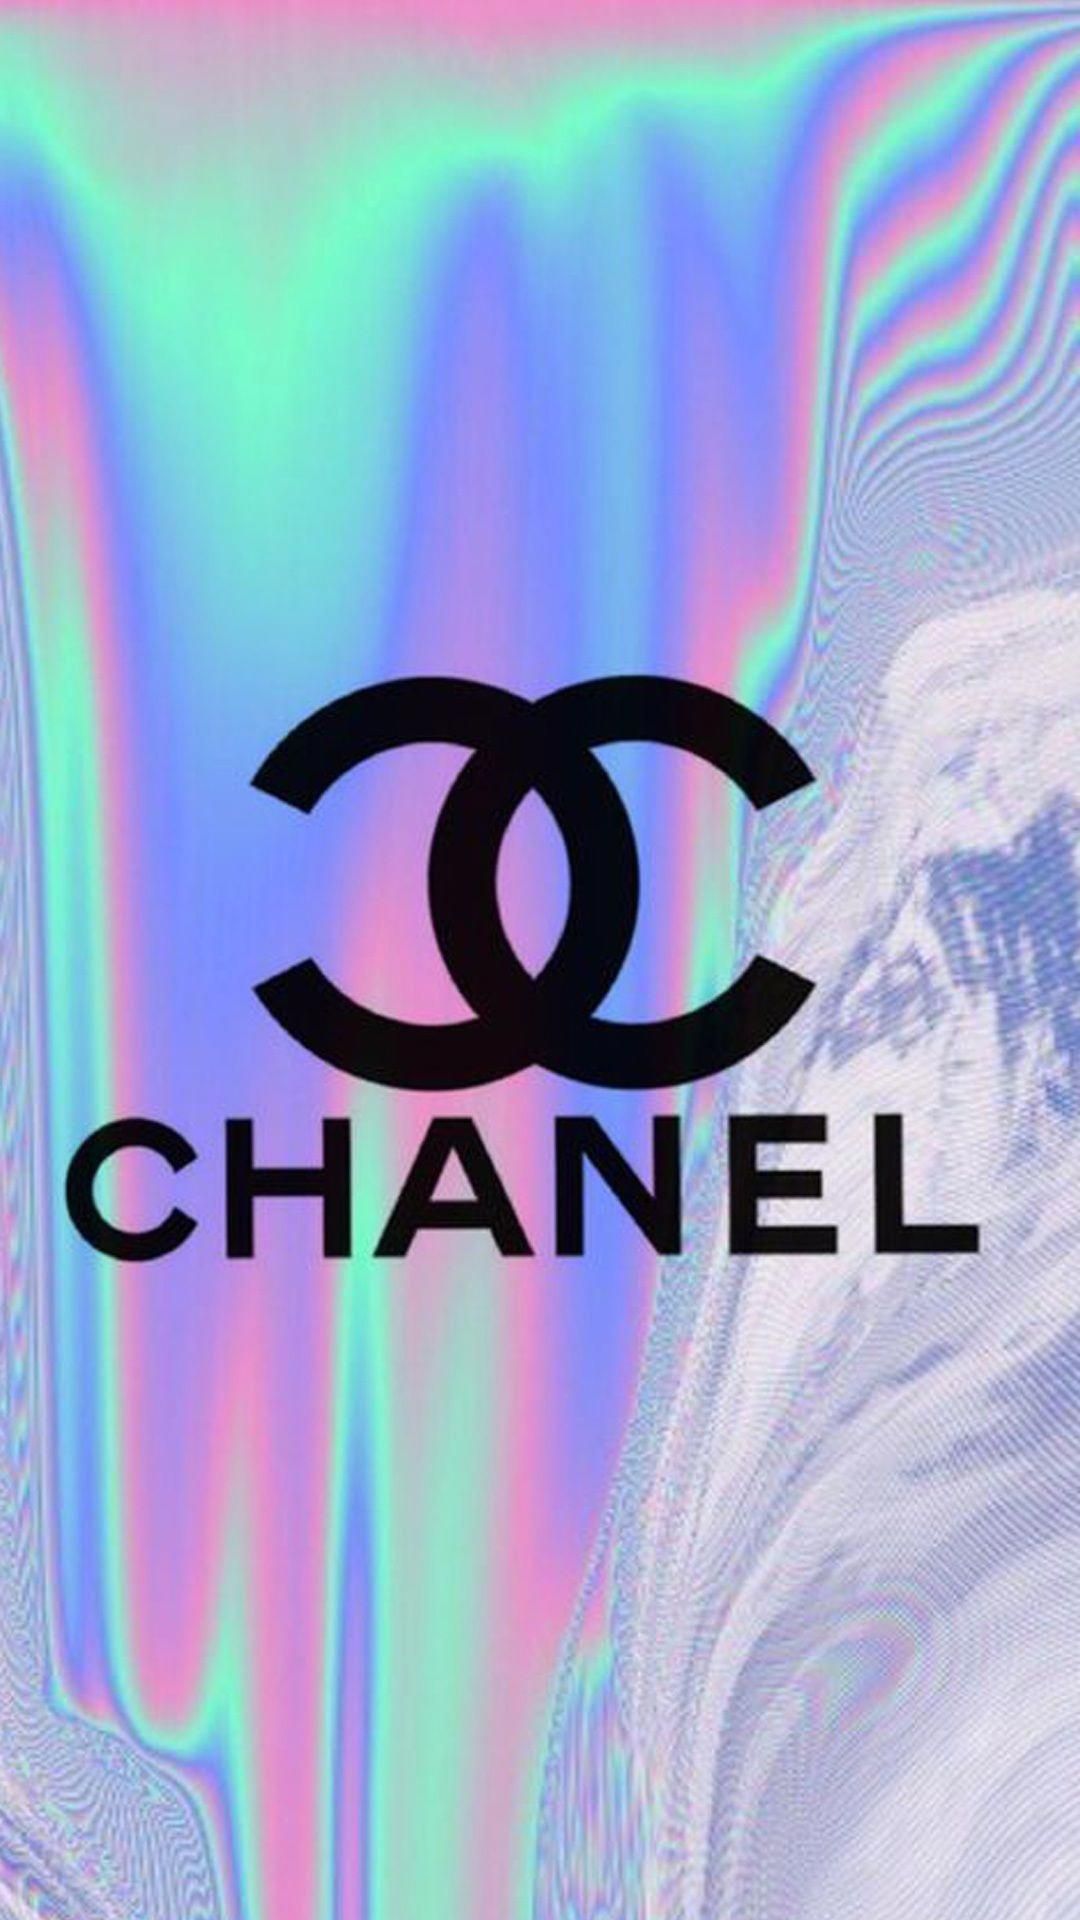 Girly Chanel iPhone Wallpaper For Background